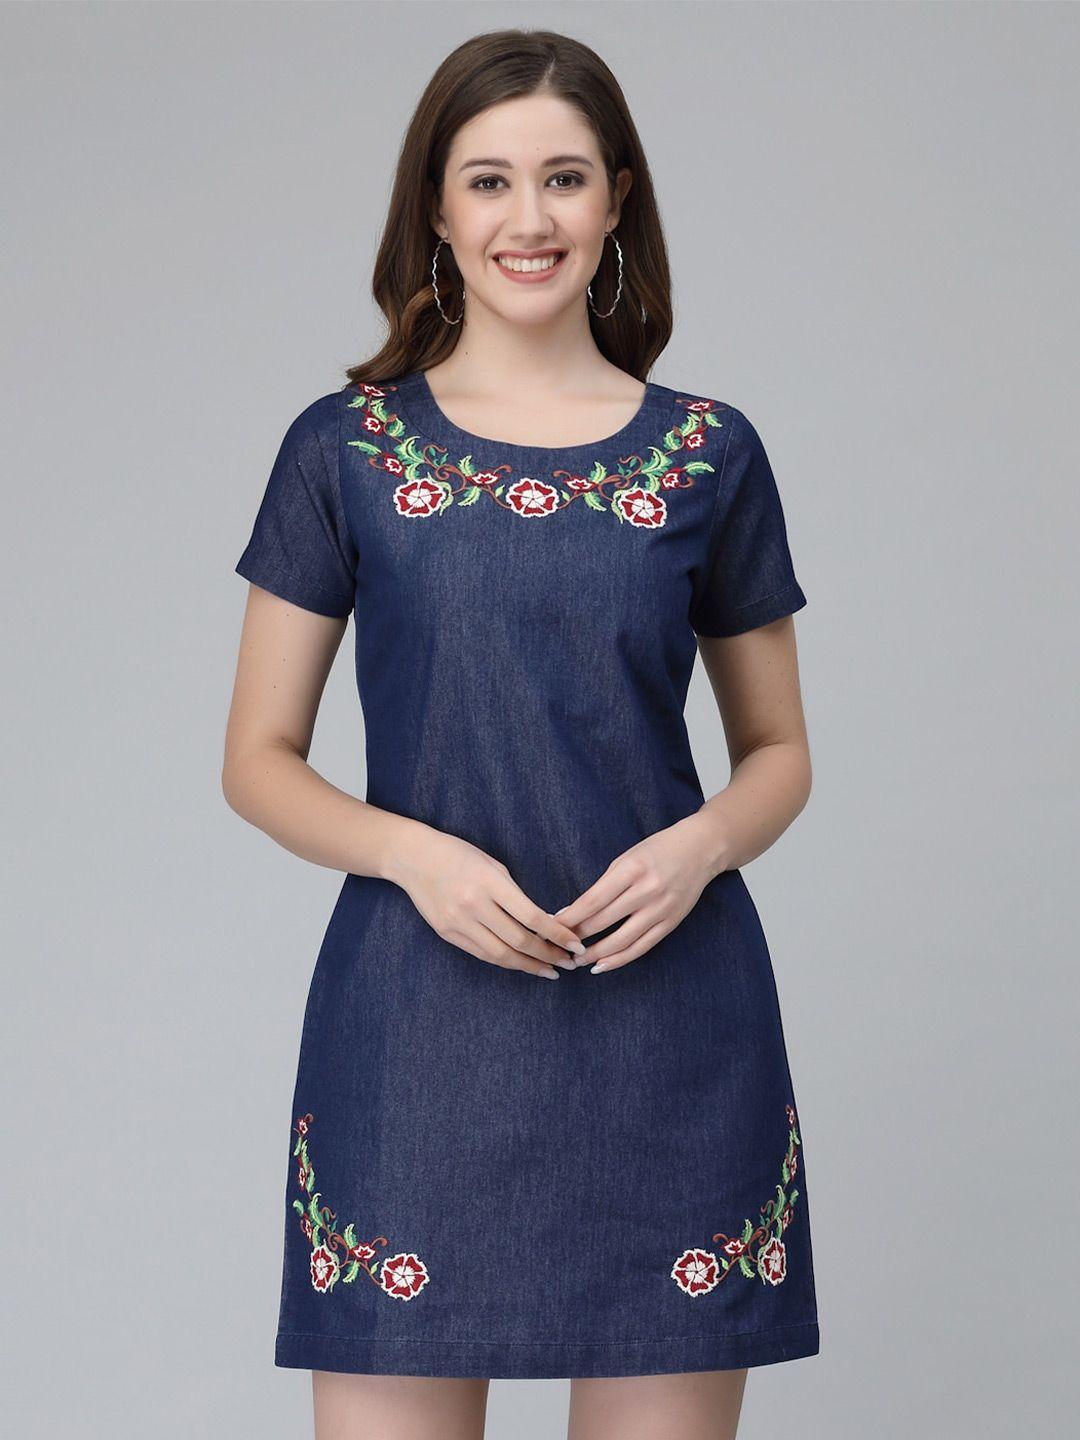 wool trees floral embroidered denim a-line mini dress